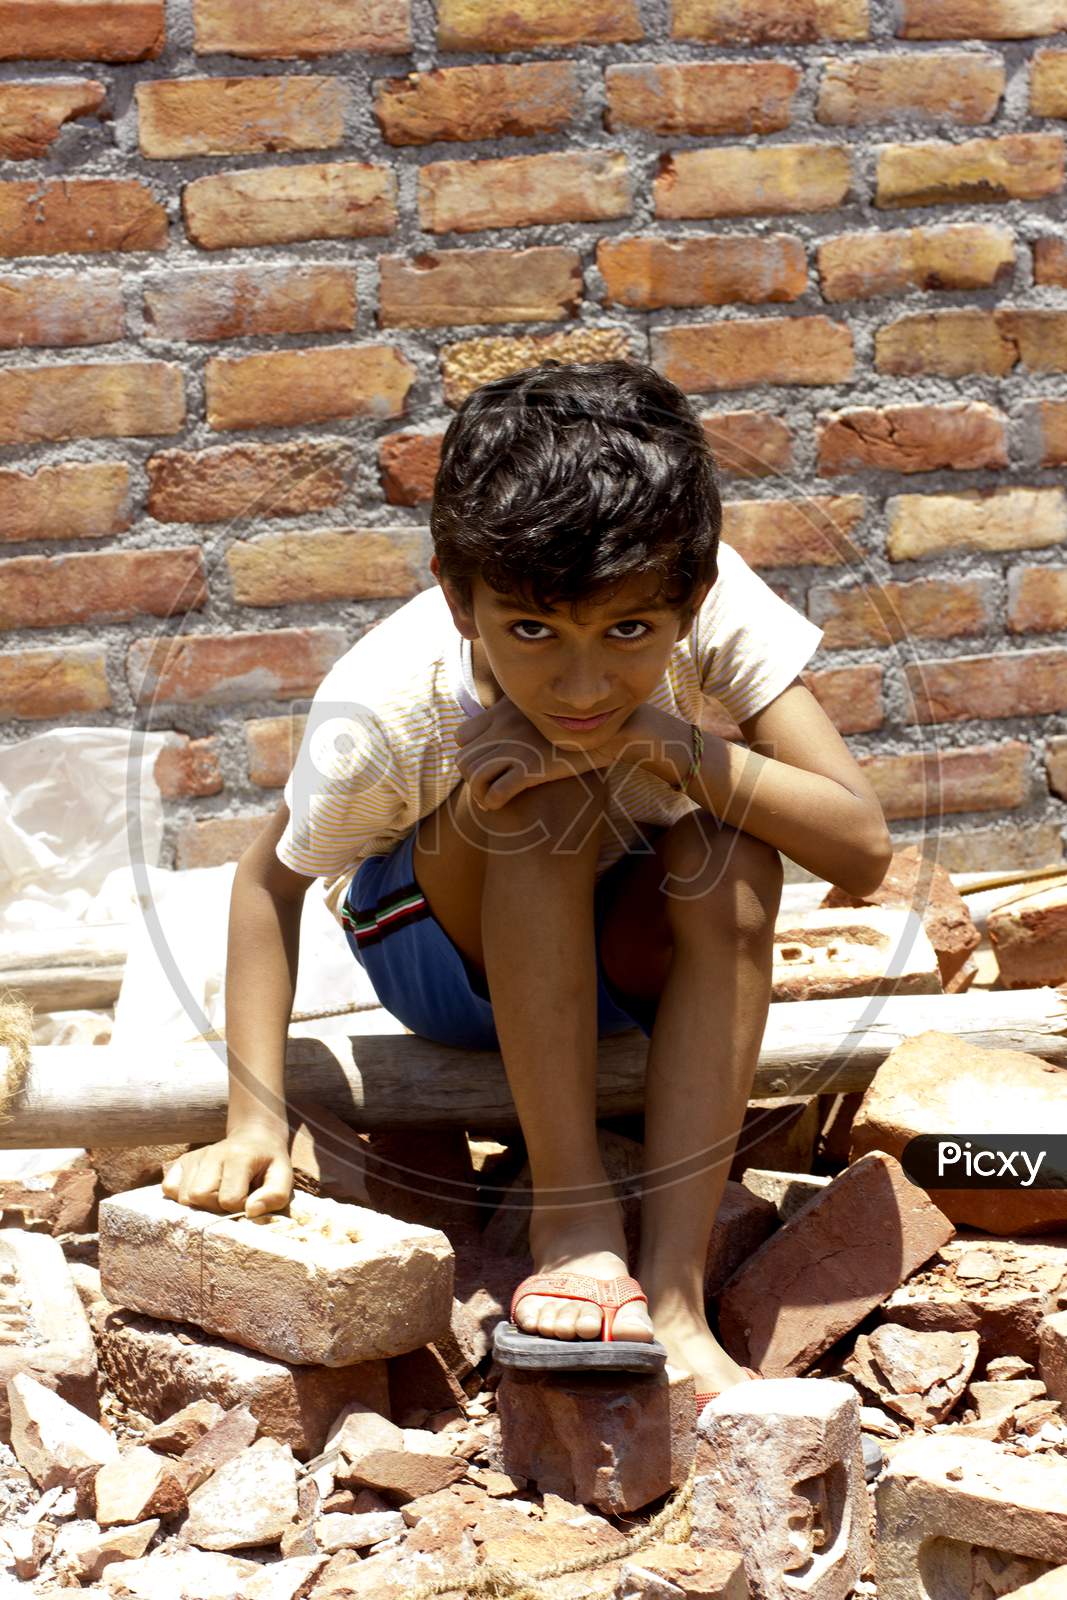 A Kid working at a Construction site